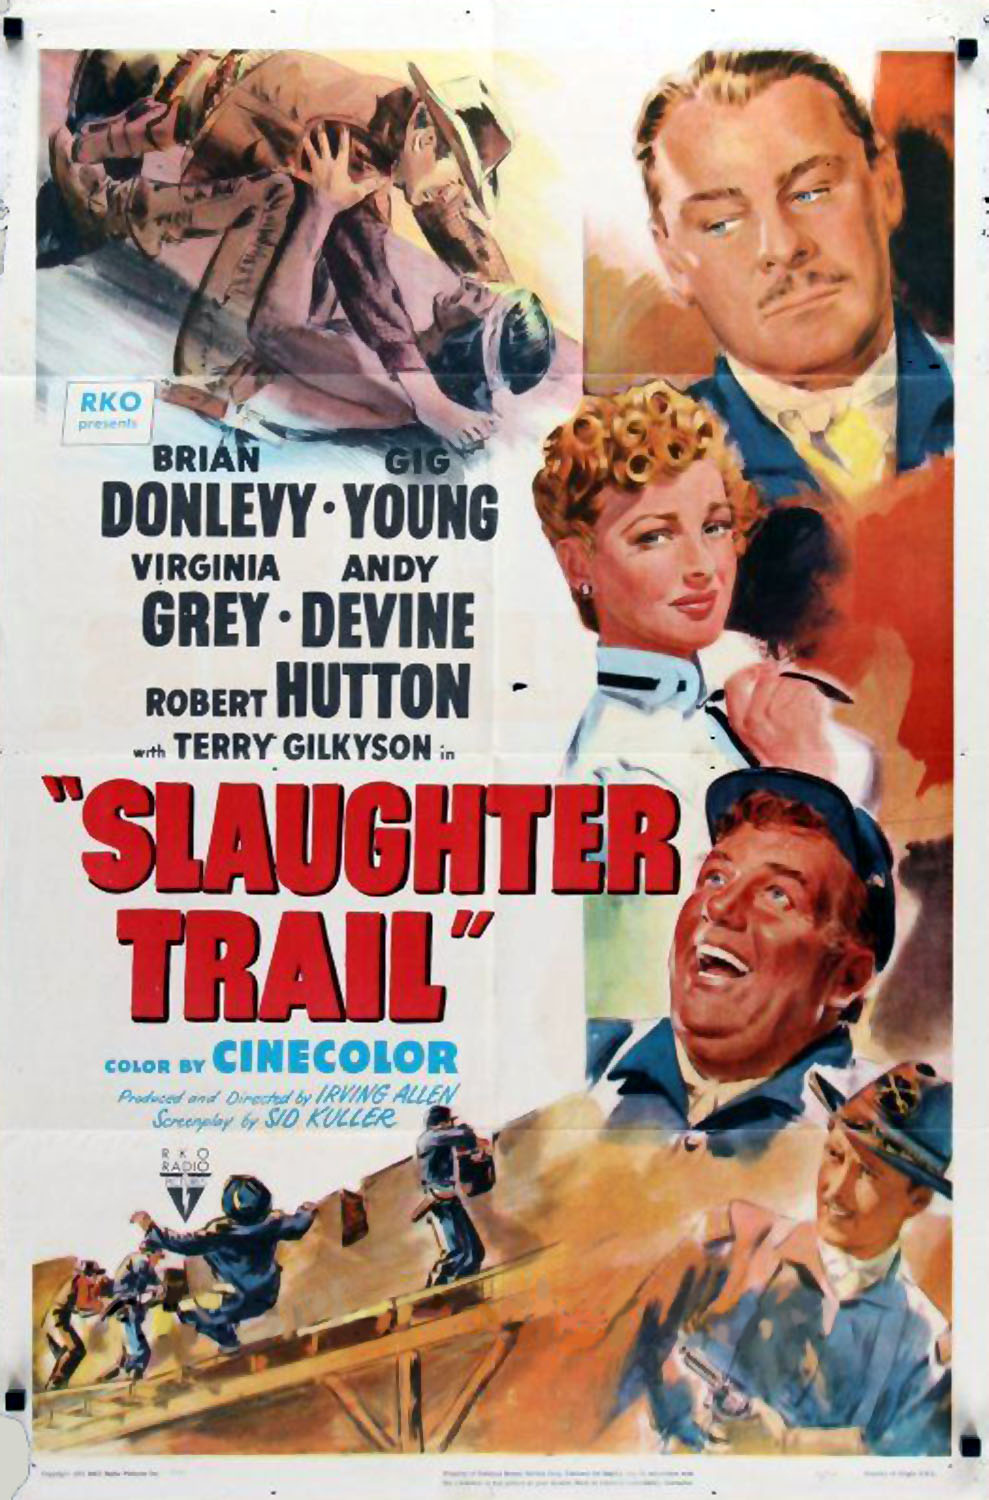 SLAUGHTER TRAIL